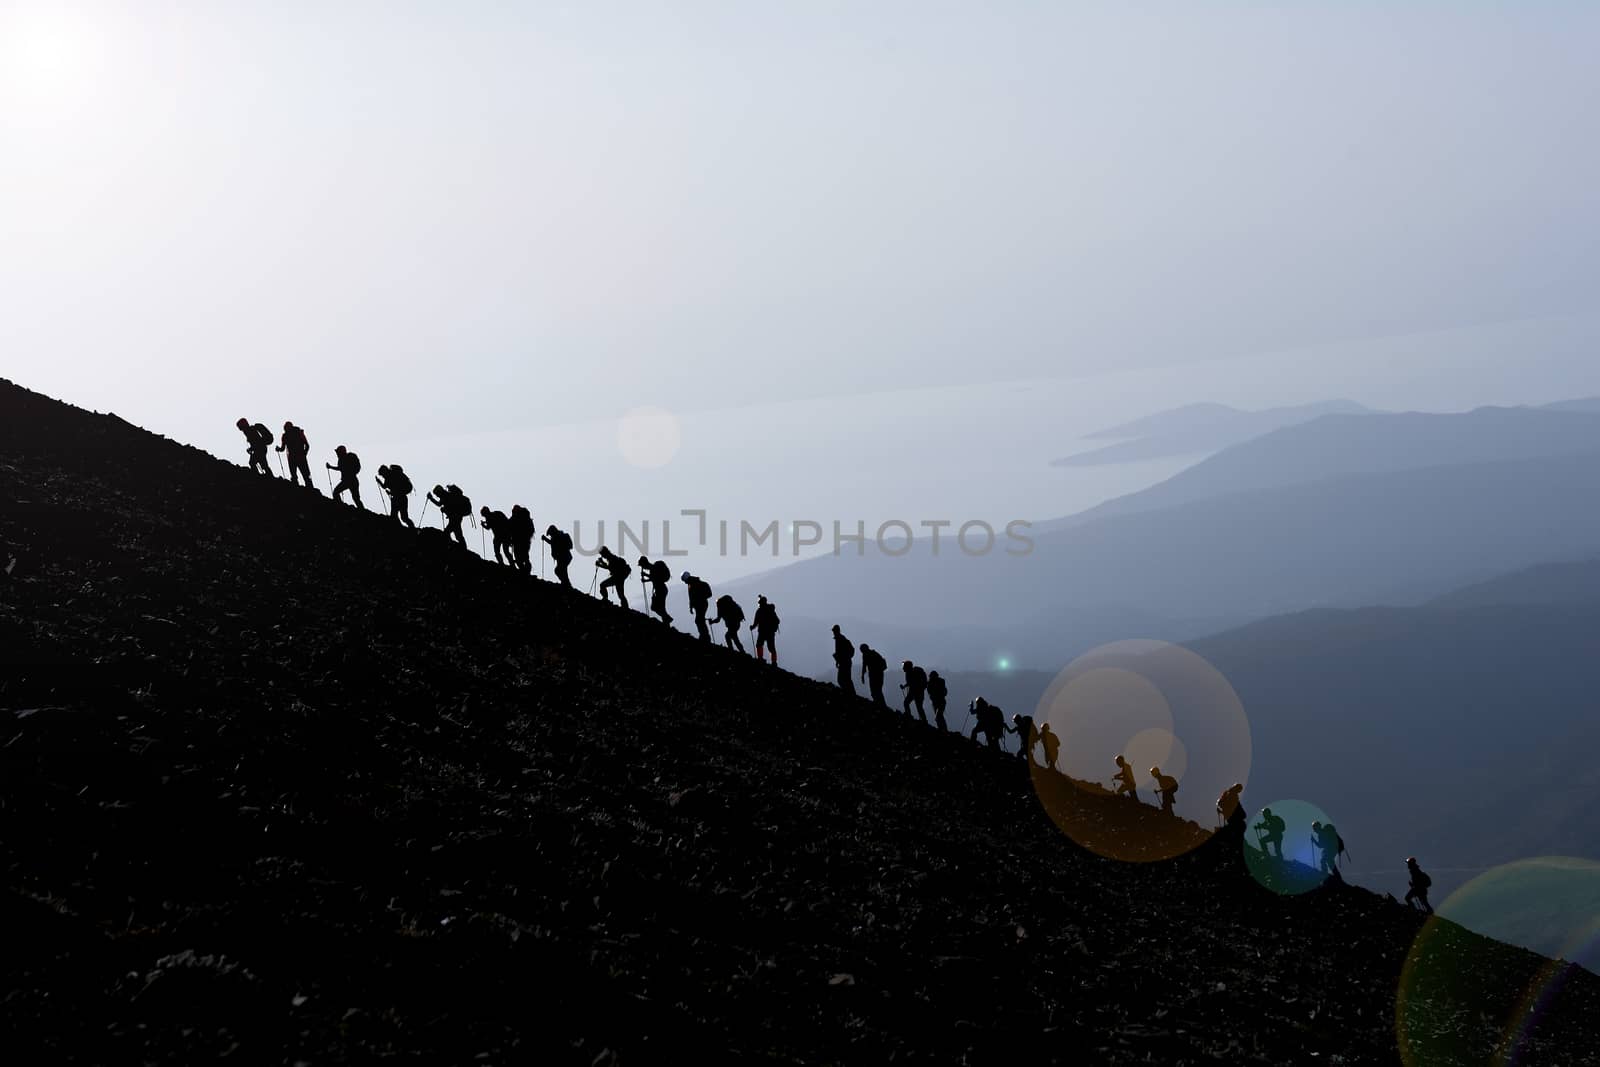 Mountain climbers at the peak of the mountains